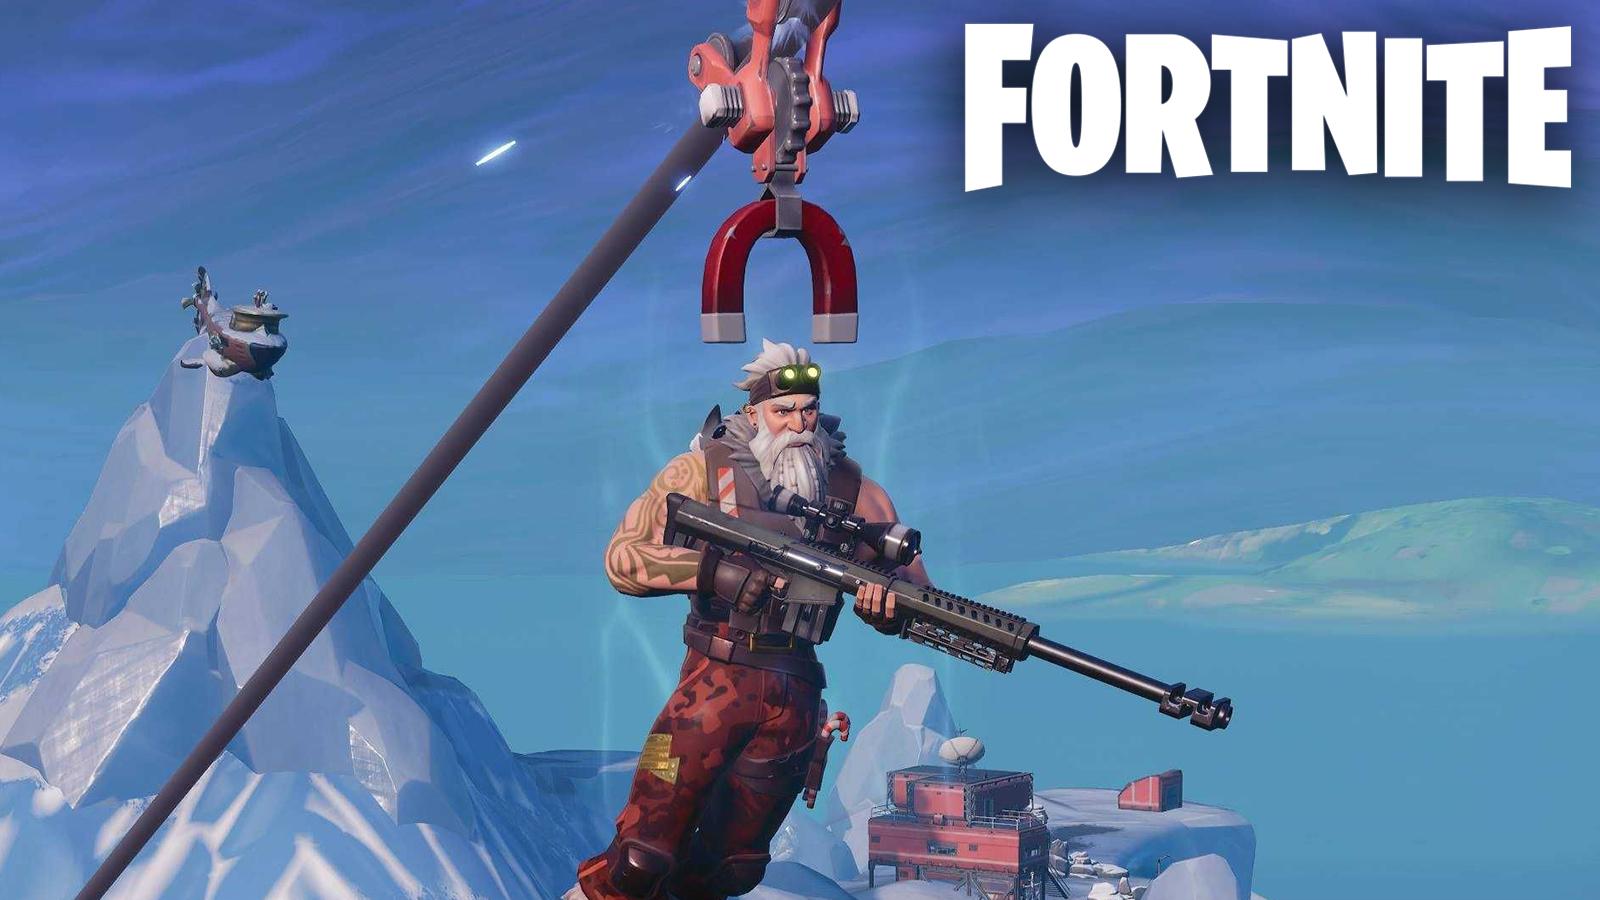 A Fortnite player using a zipline to travel across the map.